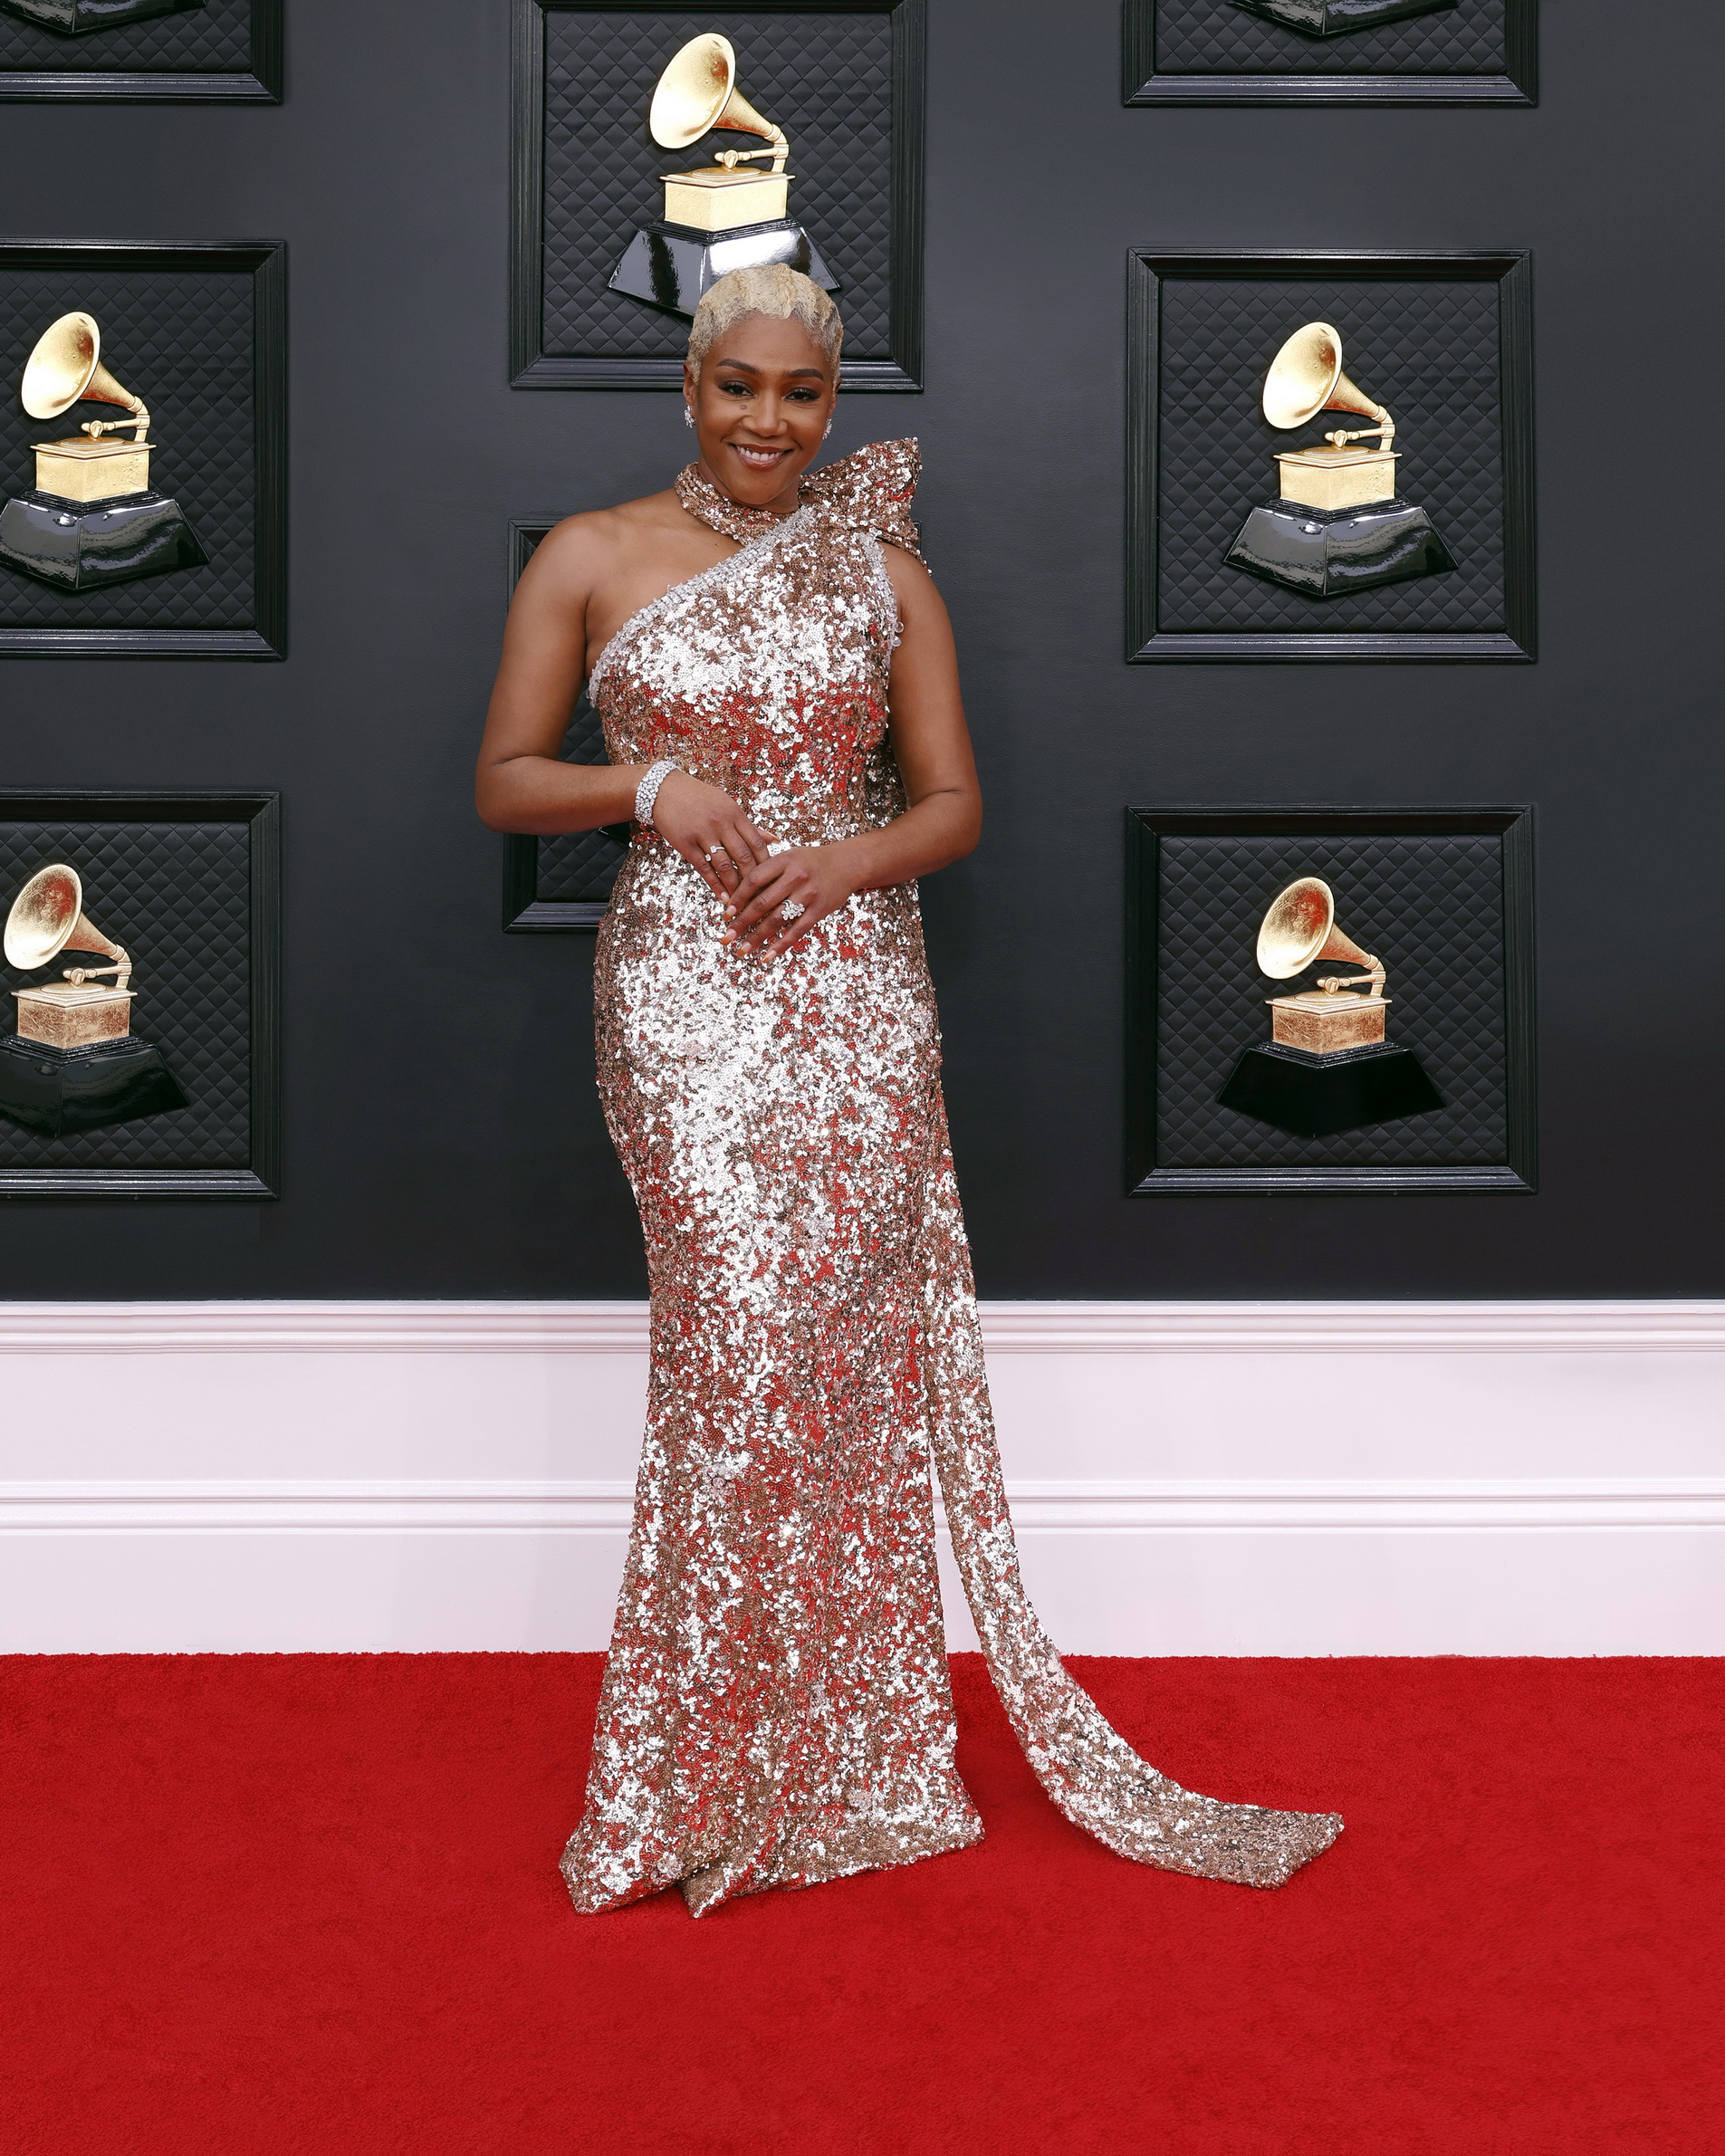  Tiffany Haddish courtesy of Frazier Harrison and Getty Images for The Recording Academy